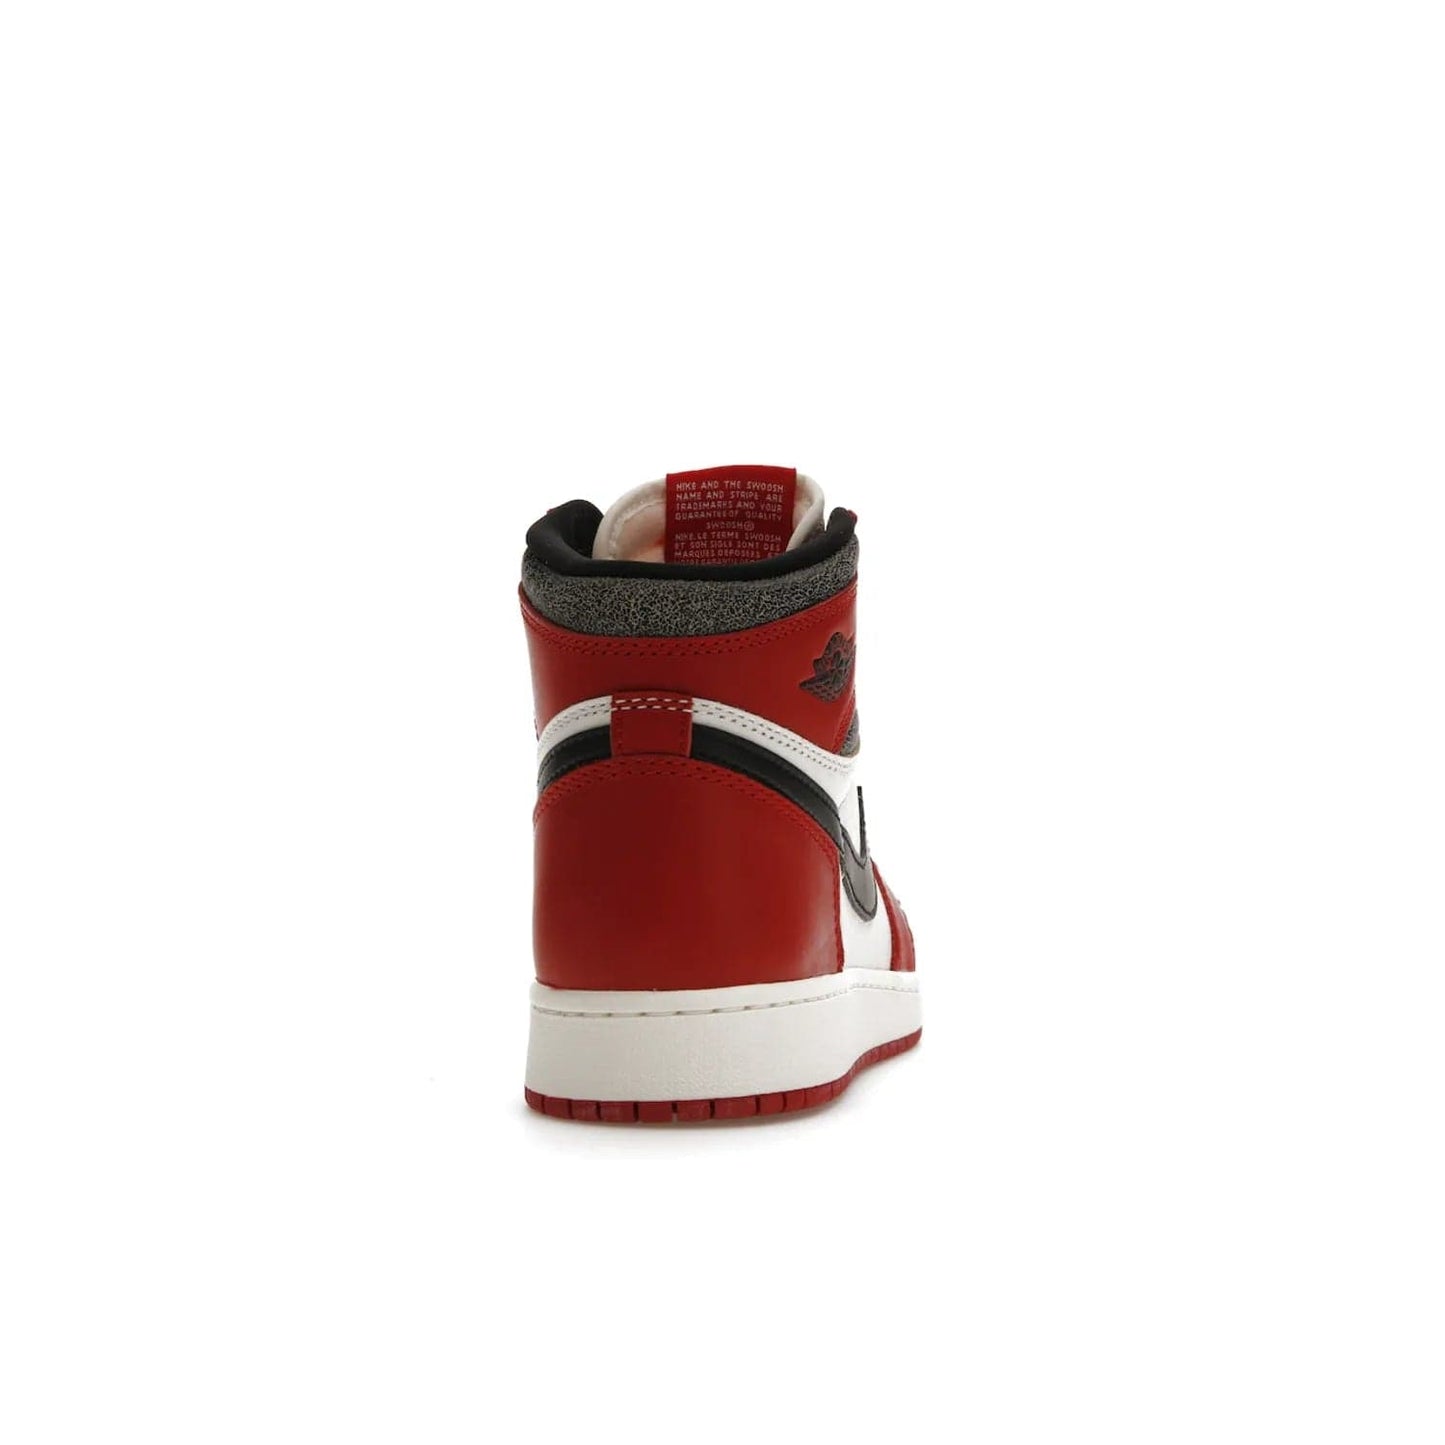 Jordan 1 Retro High OG Chicago Lost and Found (GS) - Image 29 - Only at www.BallersClubKickz.com - Grab the Air Jordan 1 Retro High OG Chicago Reimagined GS, presenting in classic 1985 silhouette. Varsity Red, Black, Muslin and Sail hues, featuring Nike Air branding, Wings on the collars and printed insoles. Don't miss out when it releases 19th Nov 2022.